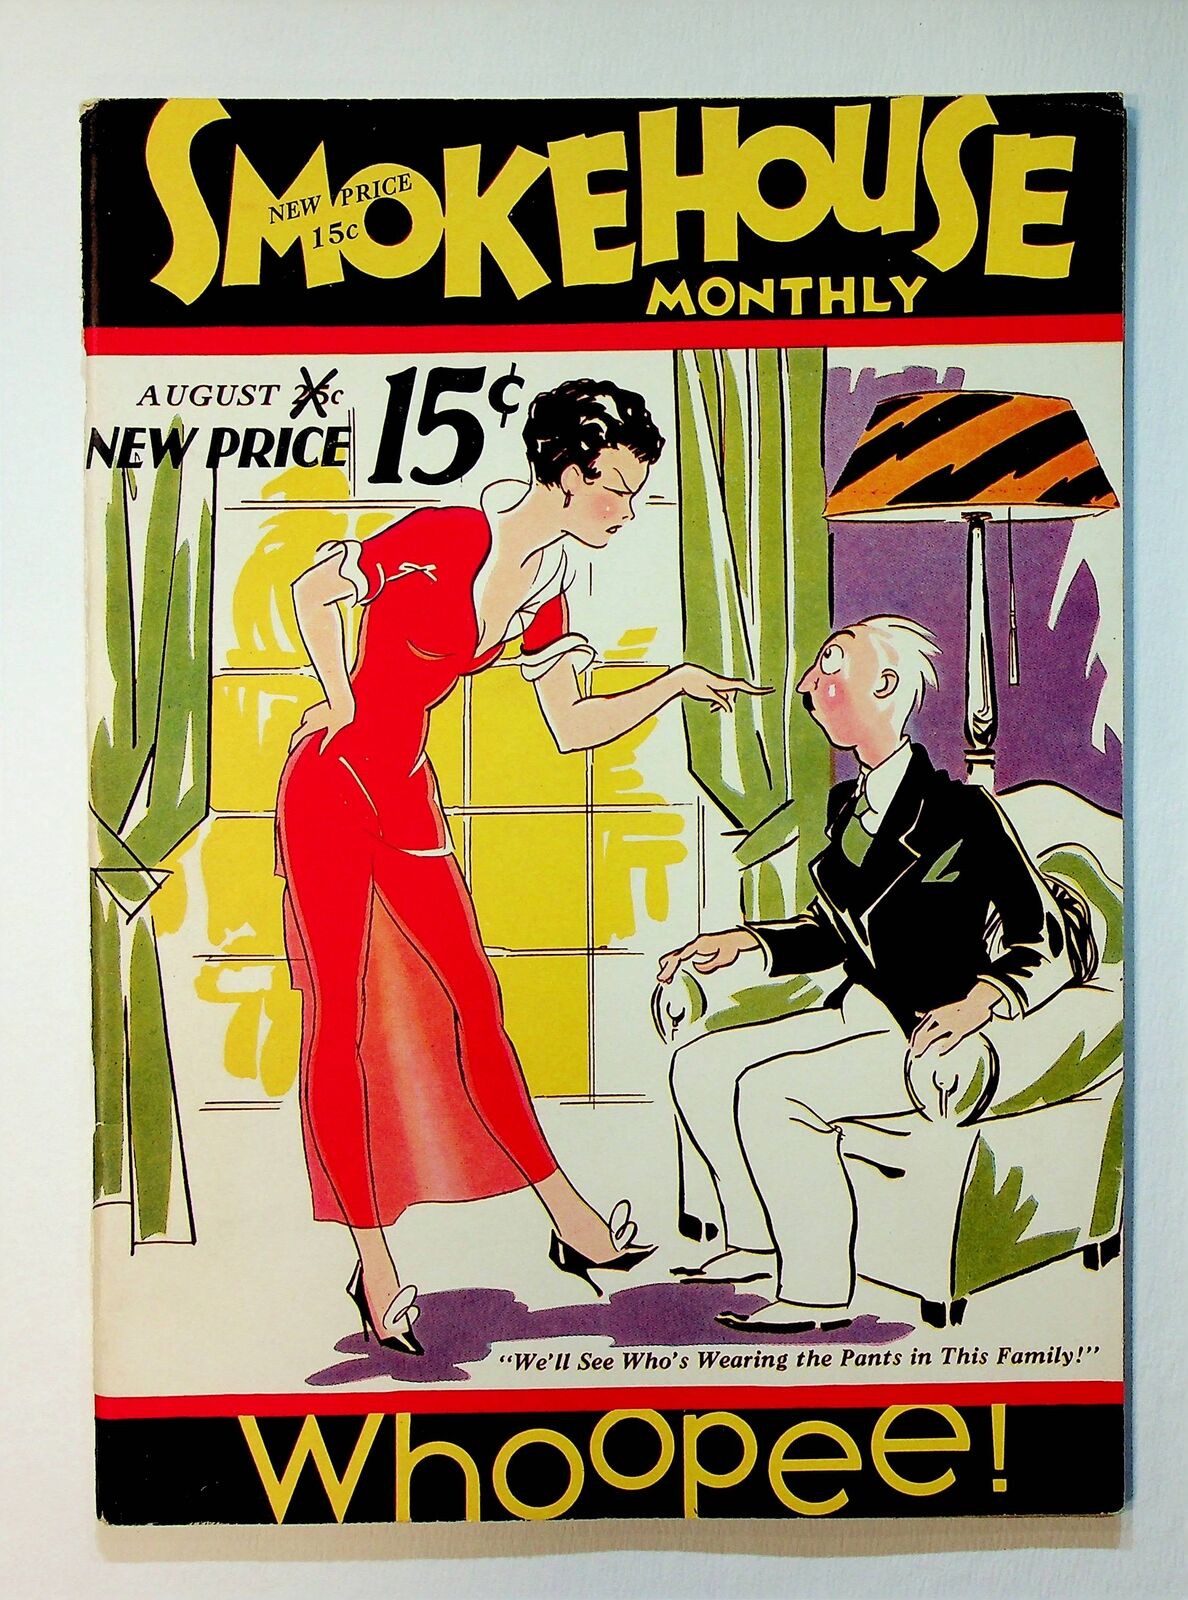 Smokehouse Monthly #56 VF 1932